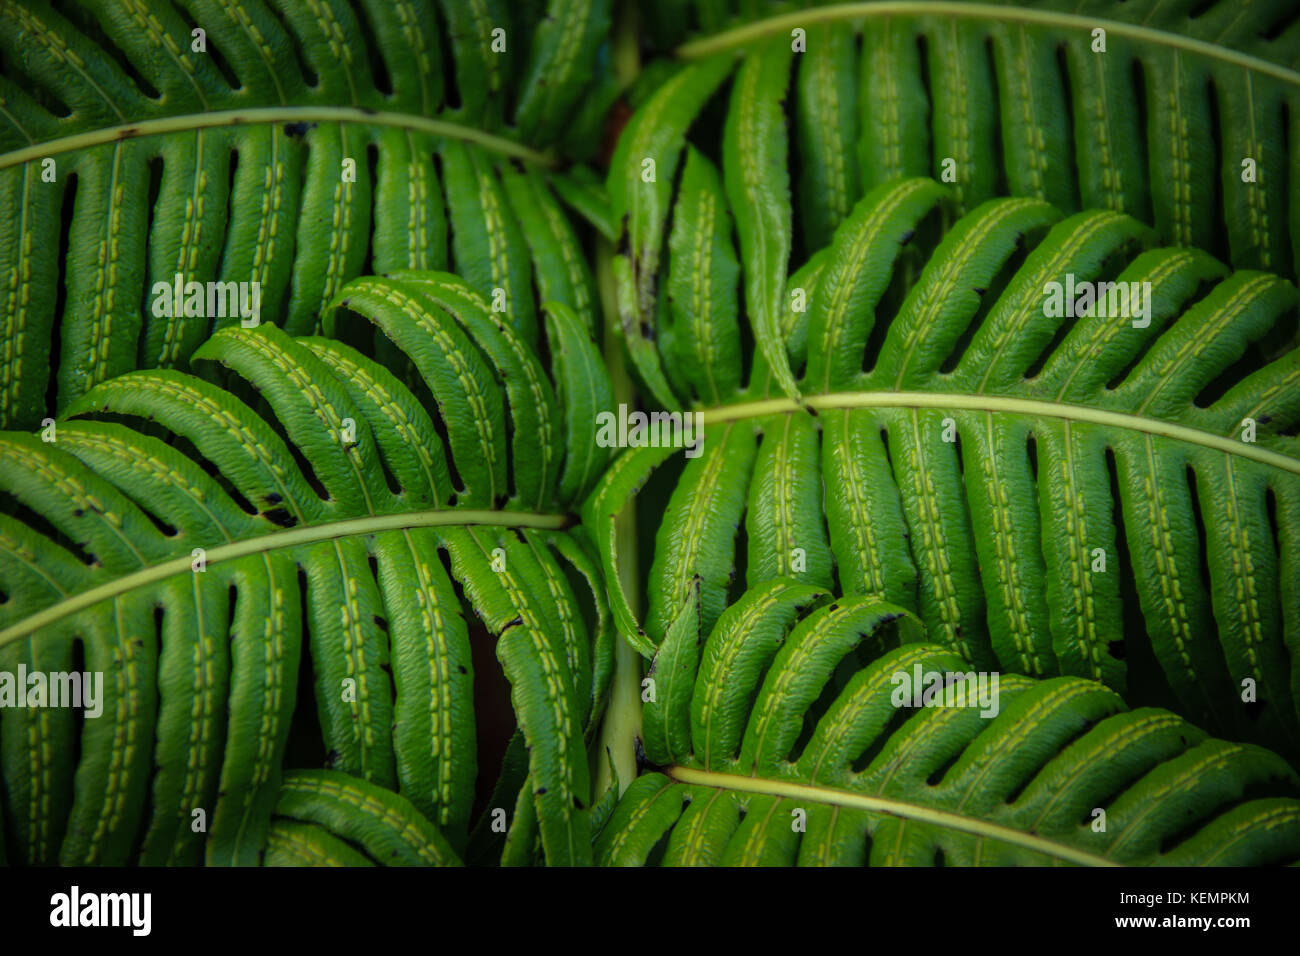 Green leaves on dark background, nature summer forest plant concept Stock Photo